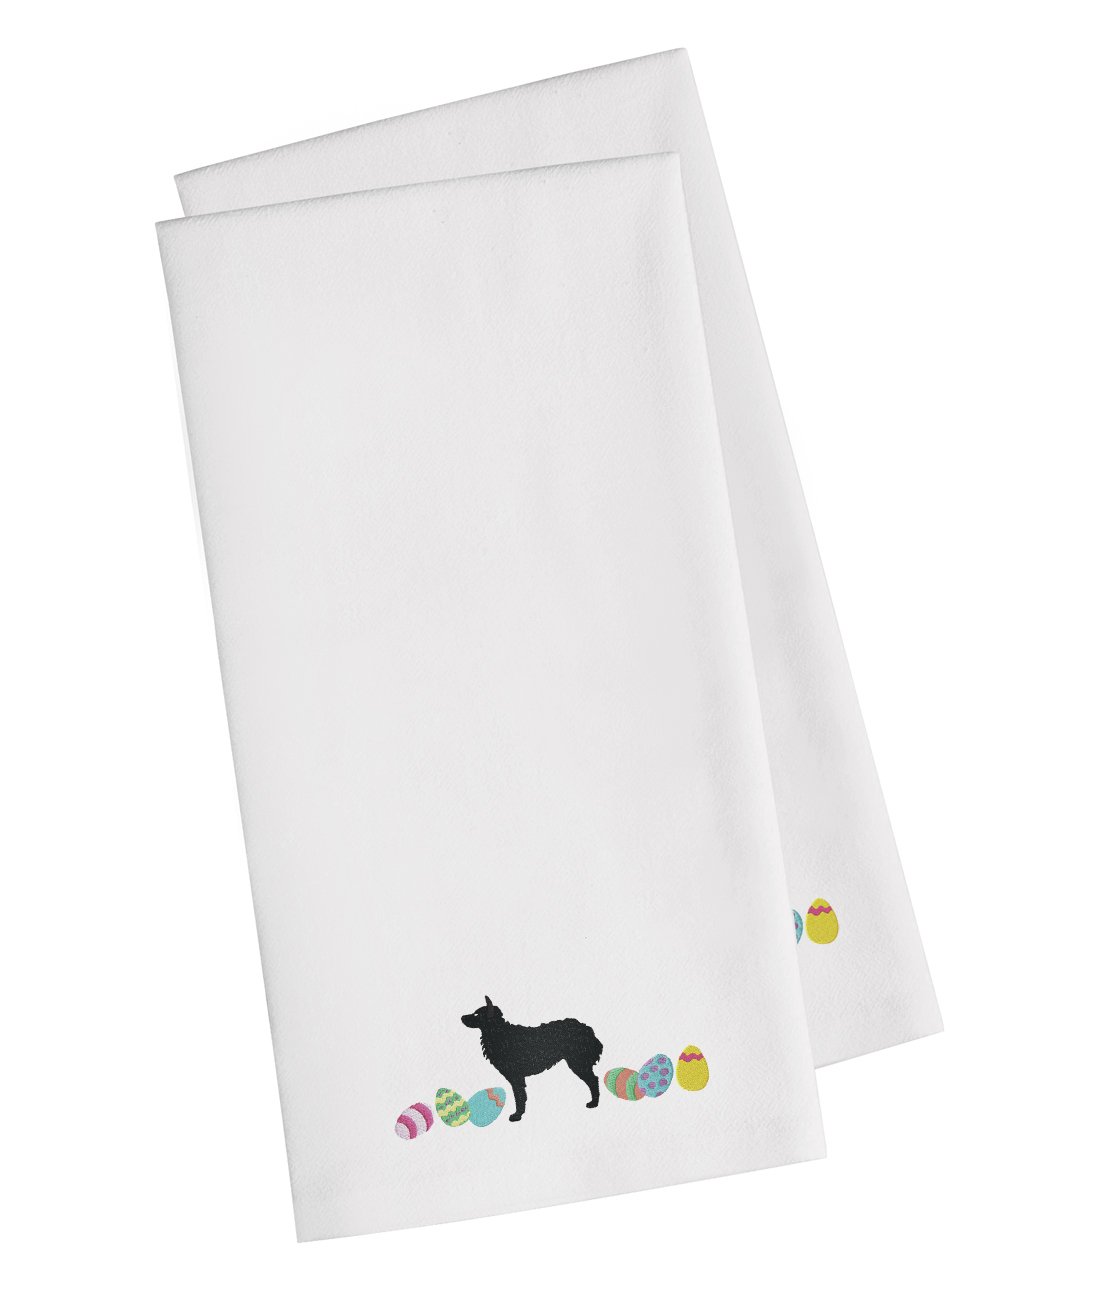 Croatian Sheepdog Easter White Embroidered Kitchen Towel Set of 2 CK1630WHTWE by Caroline's Treasures